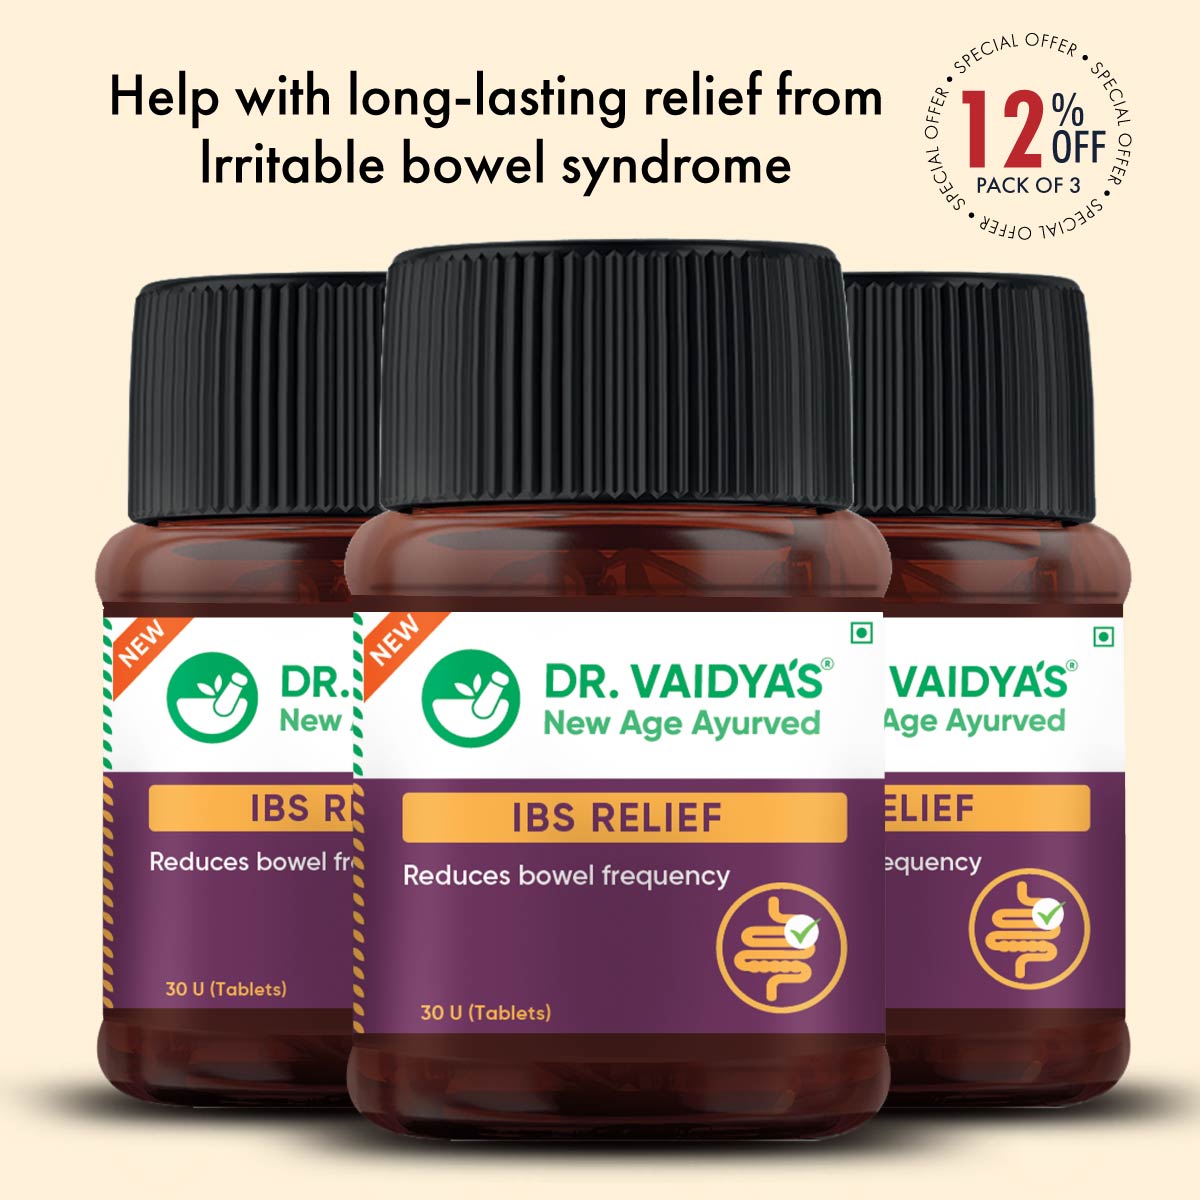 Ayurvedic Medicine for IBS Relief: Helps Relieve Cramps, Bloating & Normalize Bowel Movements